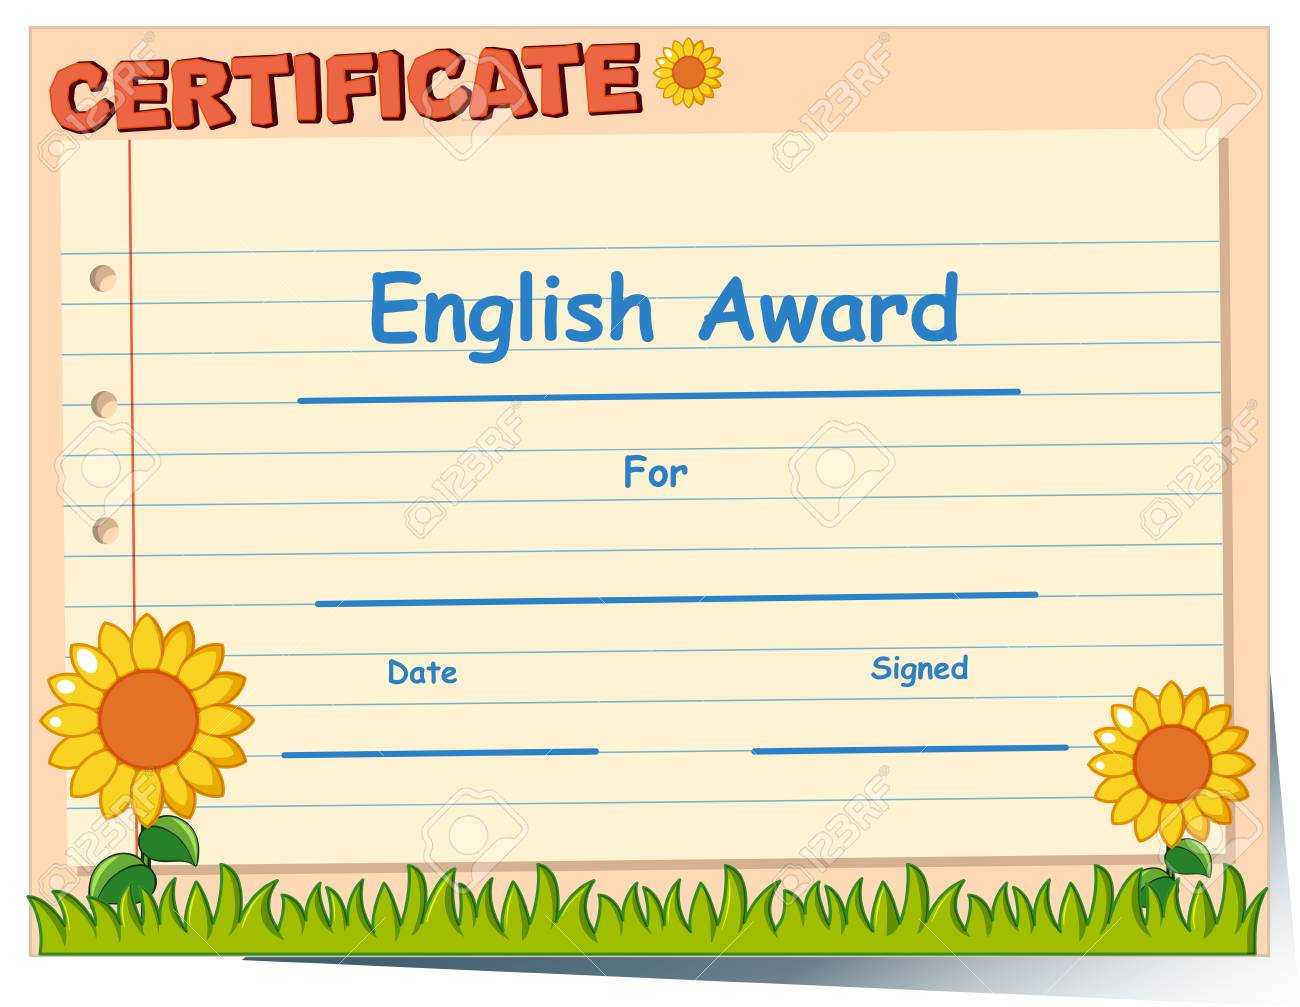 Certificate Template For English Award Illustration Inside Free Printable Blank Award Certificate Templates